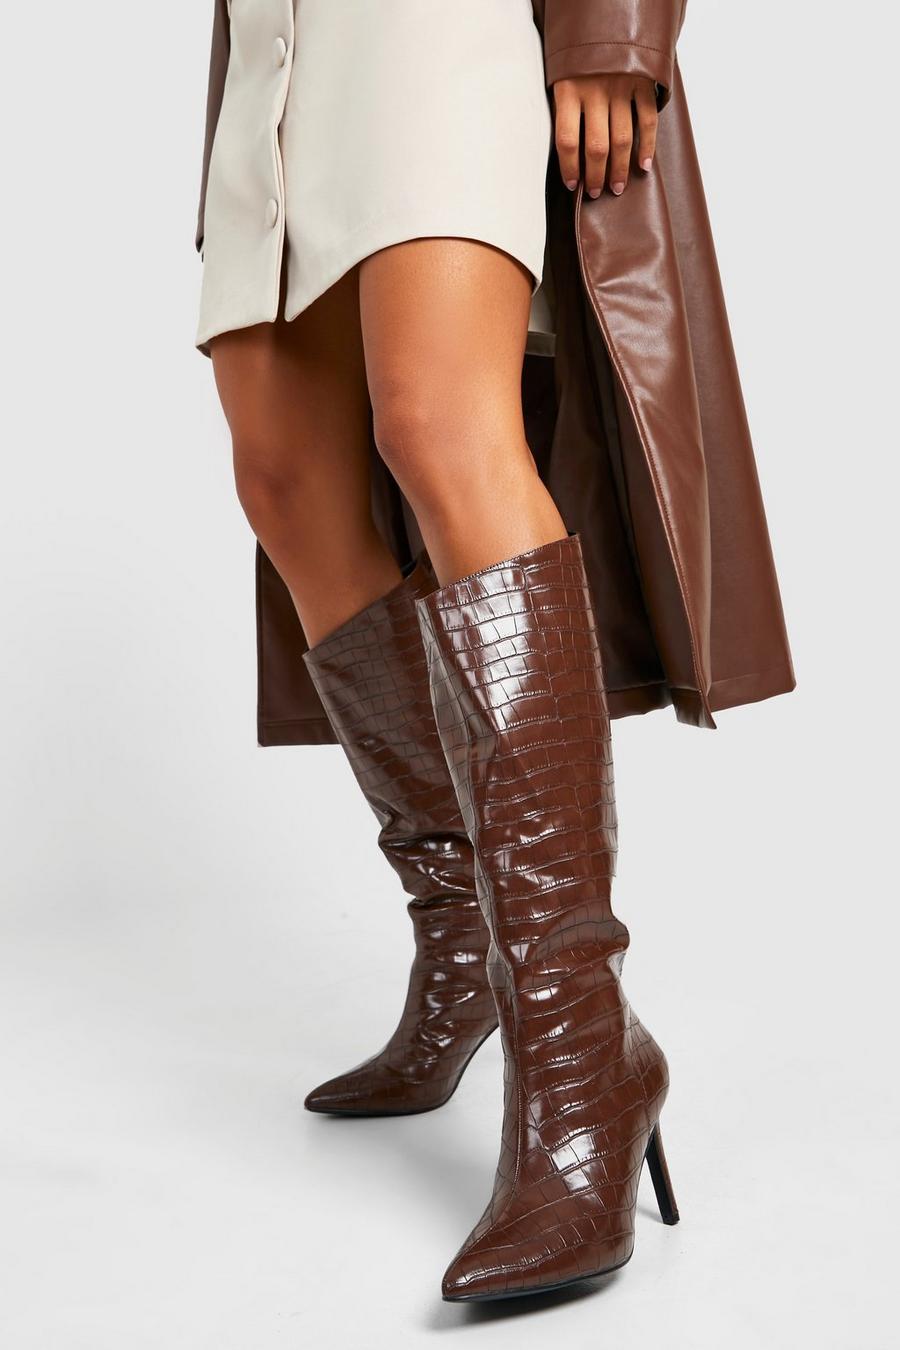 Chocolate brown Croc Asymmetric Pointed Toe Knee High Boots